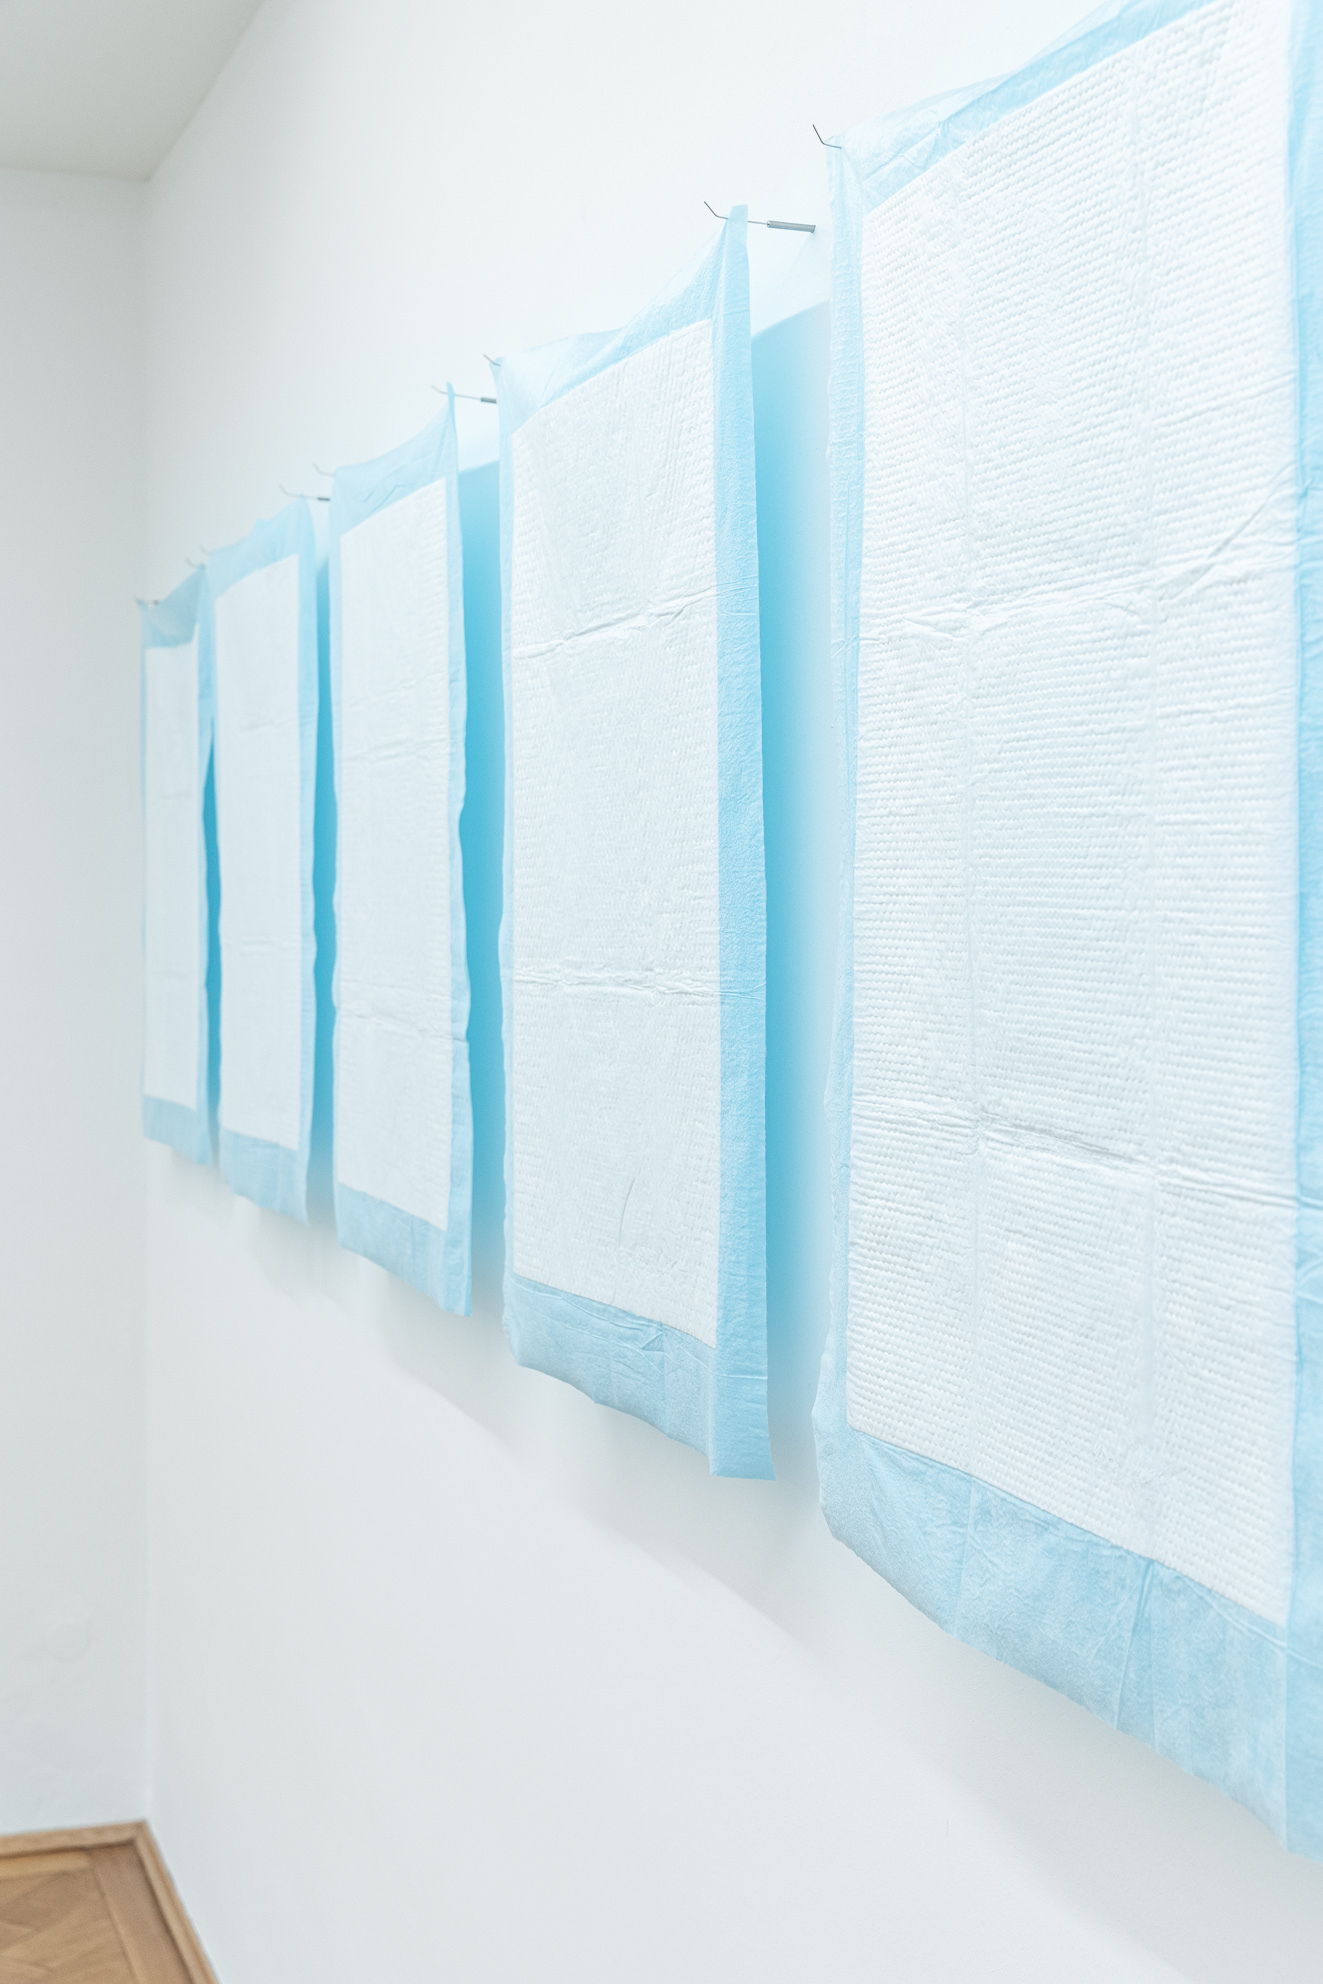 Laura Ní Fhlaibhín, "good luck" (detail), 2023, 7 digitally embroidered incontinence pads, held with stainless steel surgical seekers. Handwritten wish written by Rita Hurney, Laura’s grandmother, 60 x 90 cm